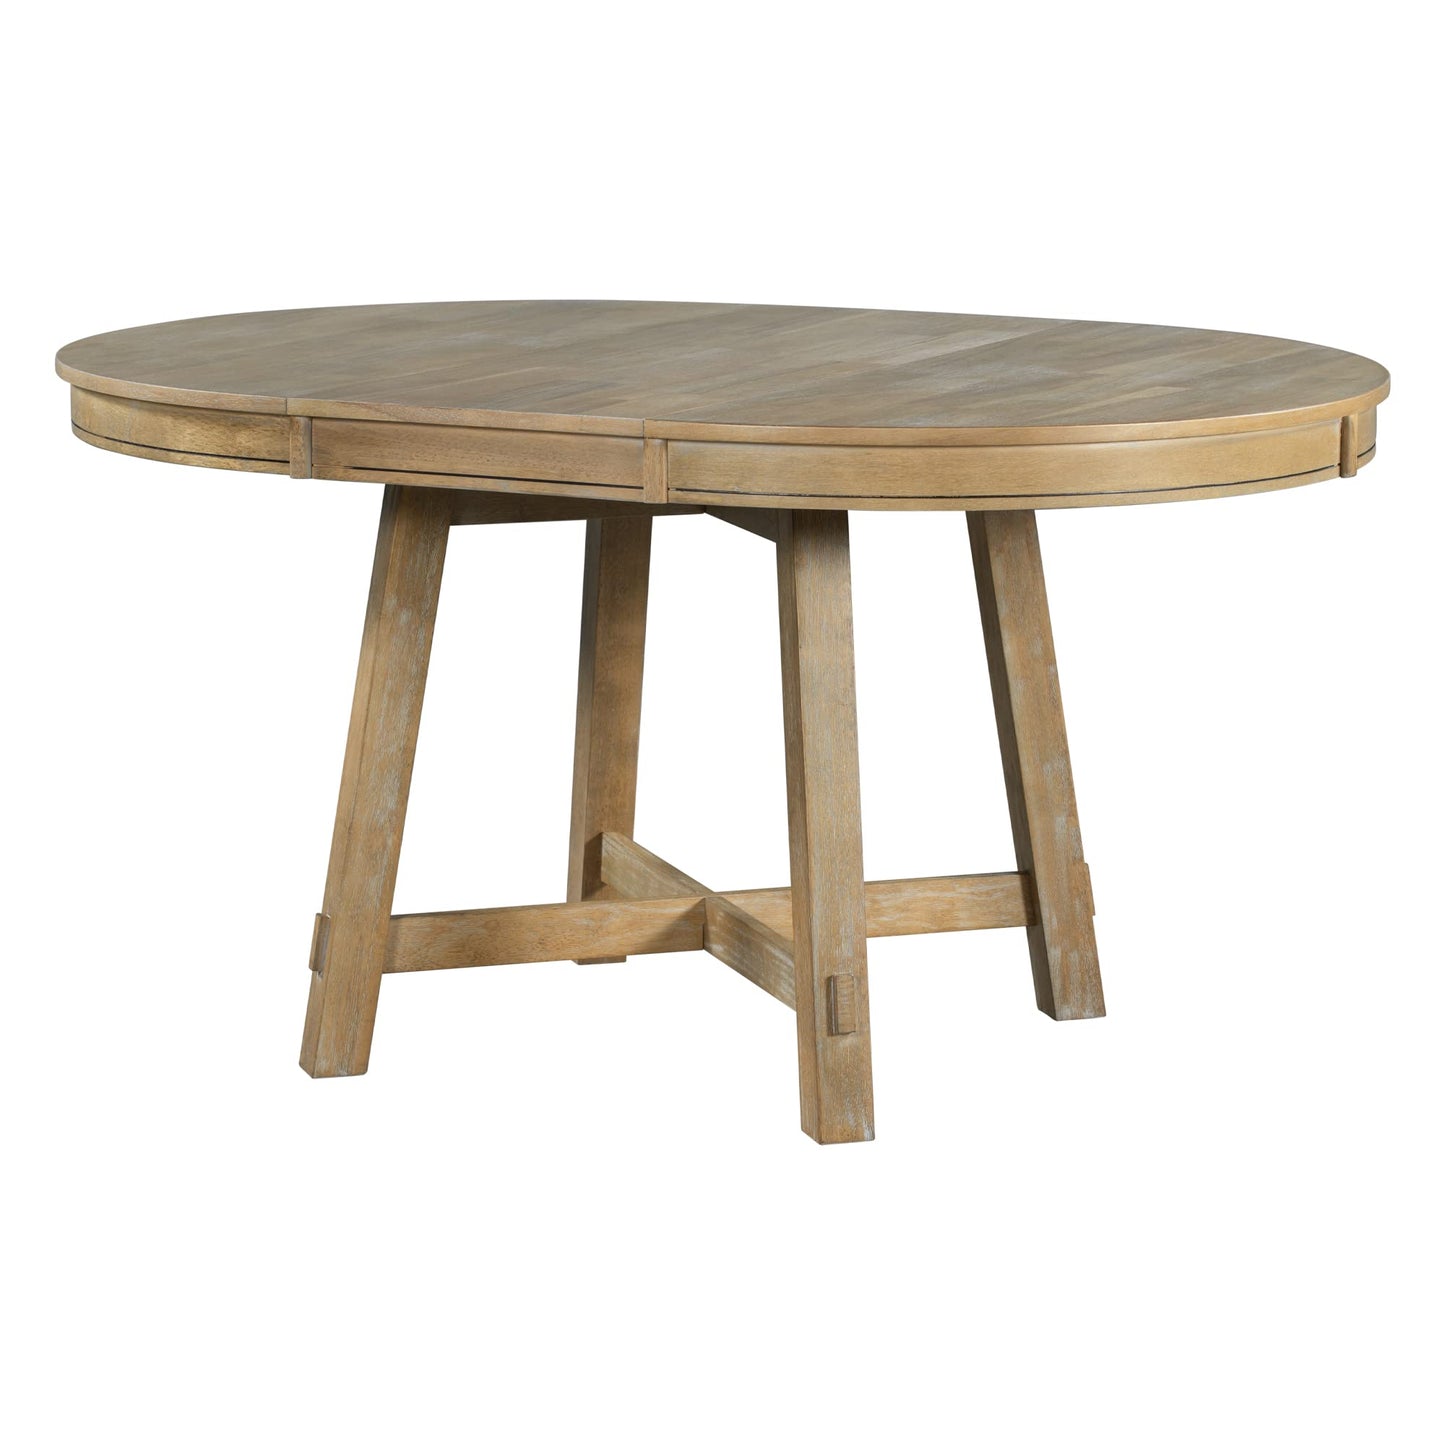 Merax Round Wood Dining Table, Farmhouse Round Extendable Dining Table with 16" Leaf For Kitchen (Natural Wood Wash)